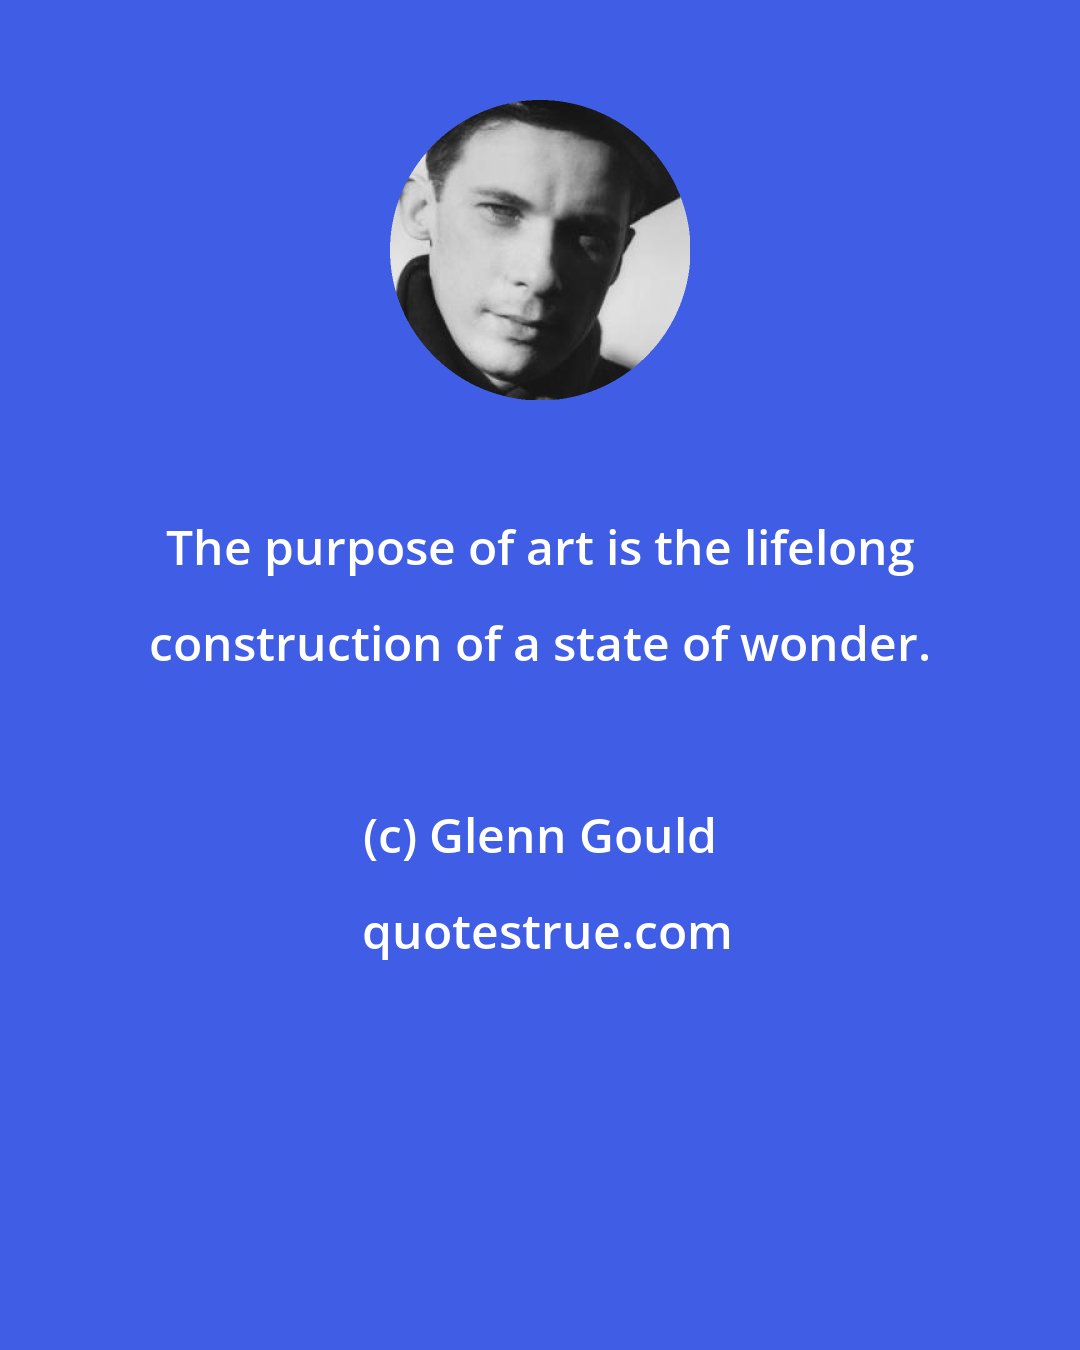 Glenn Gould: The purpose of art is the lifelong construction of a state of wonder.